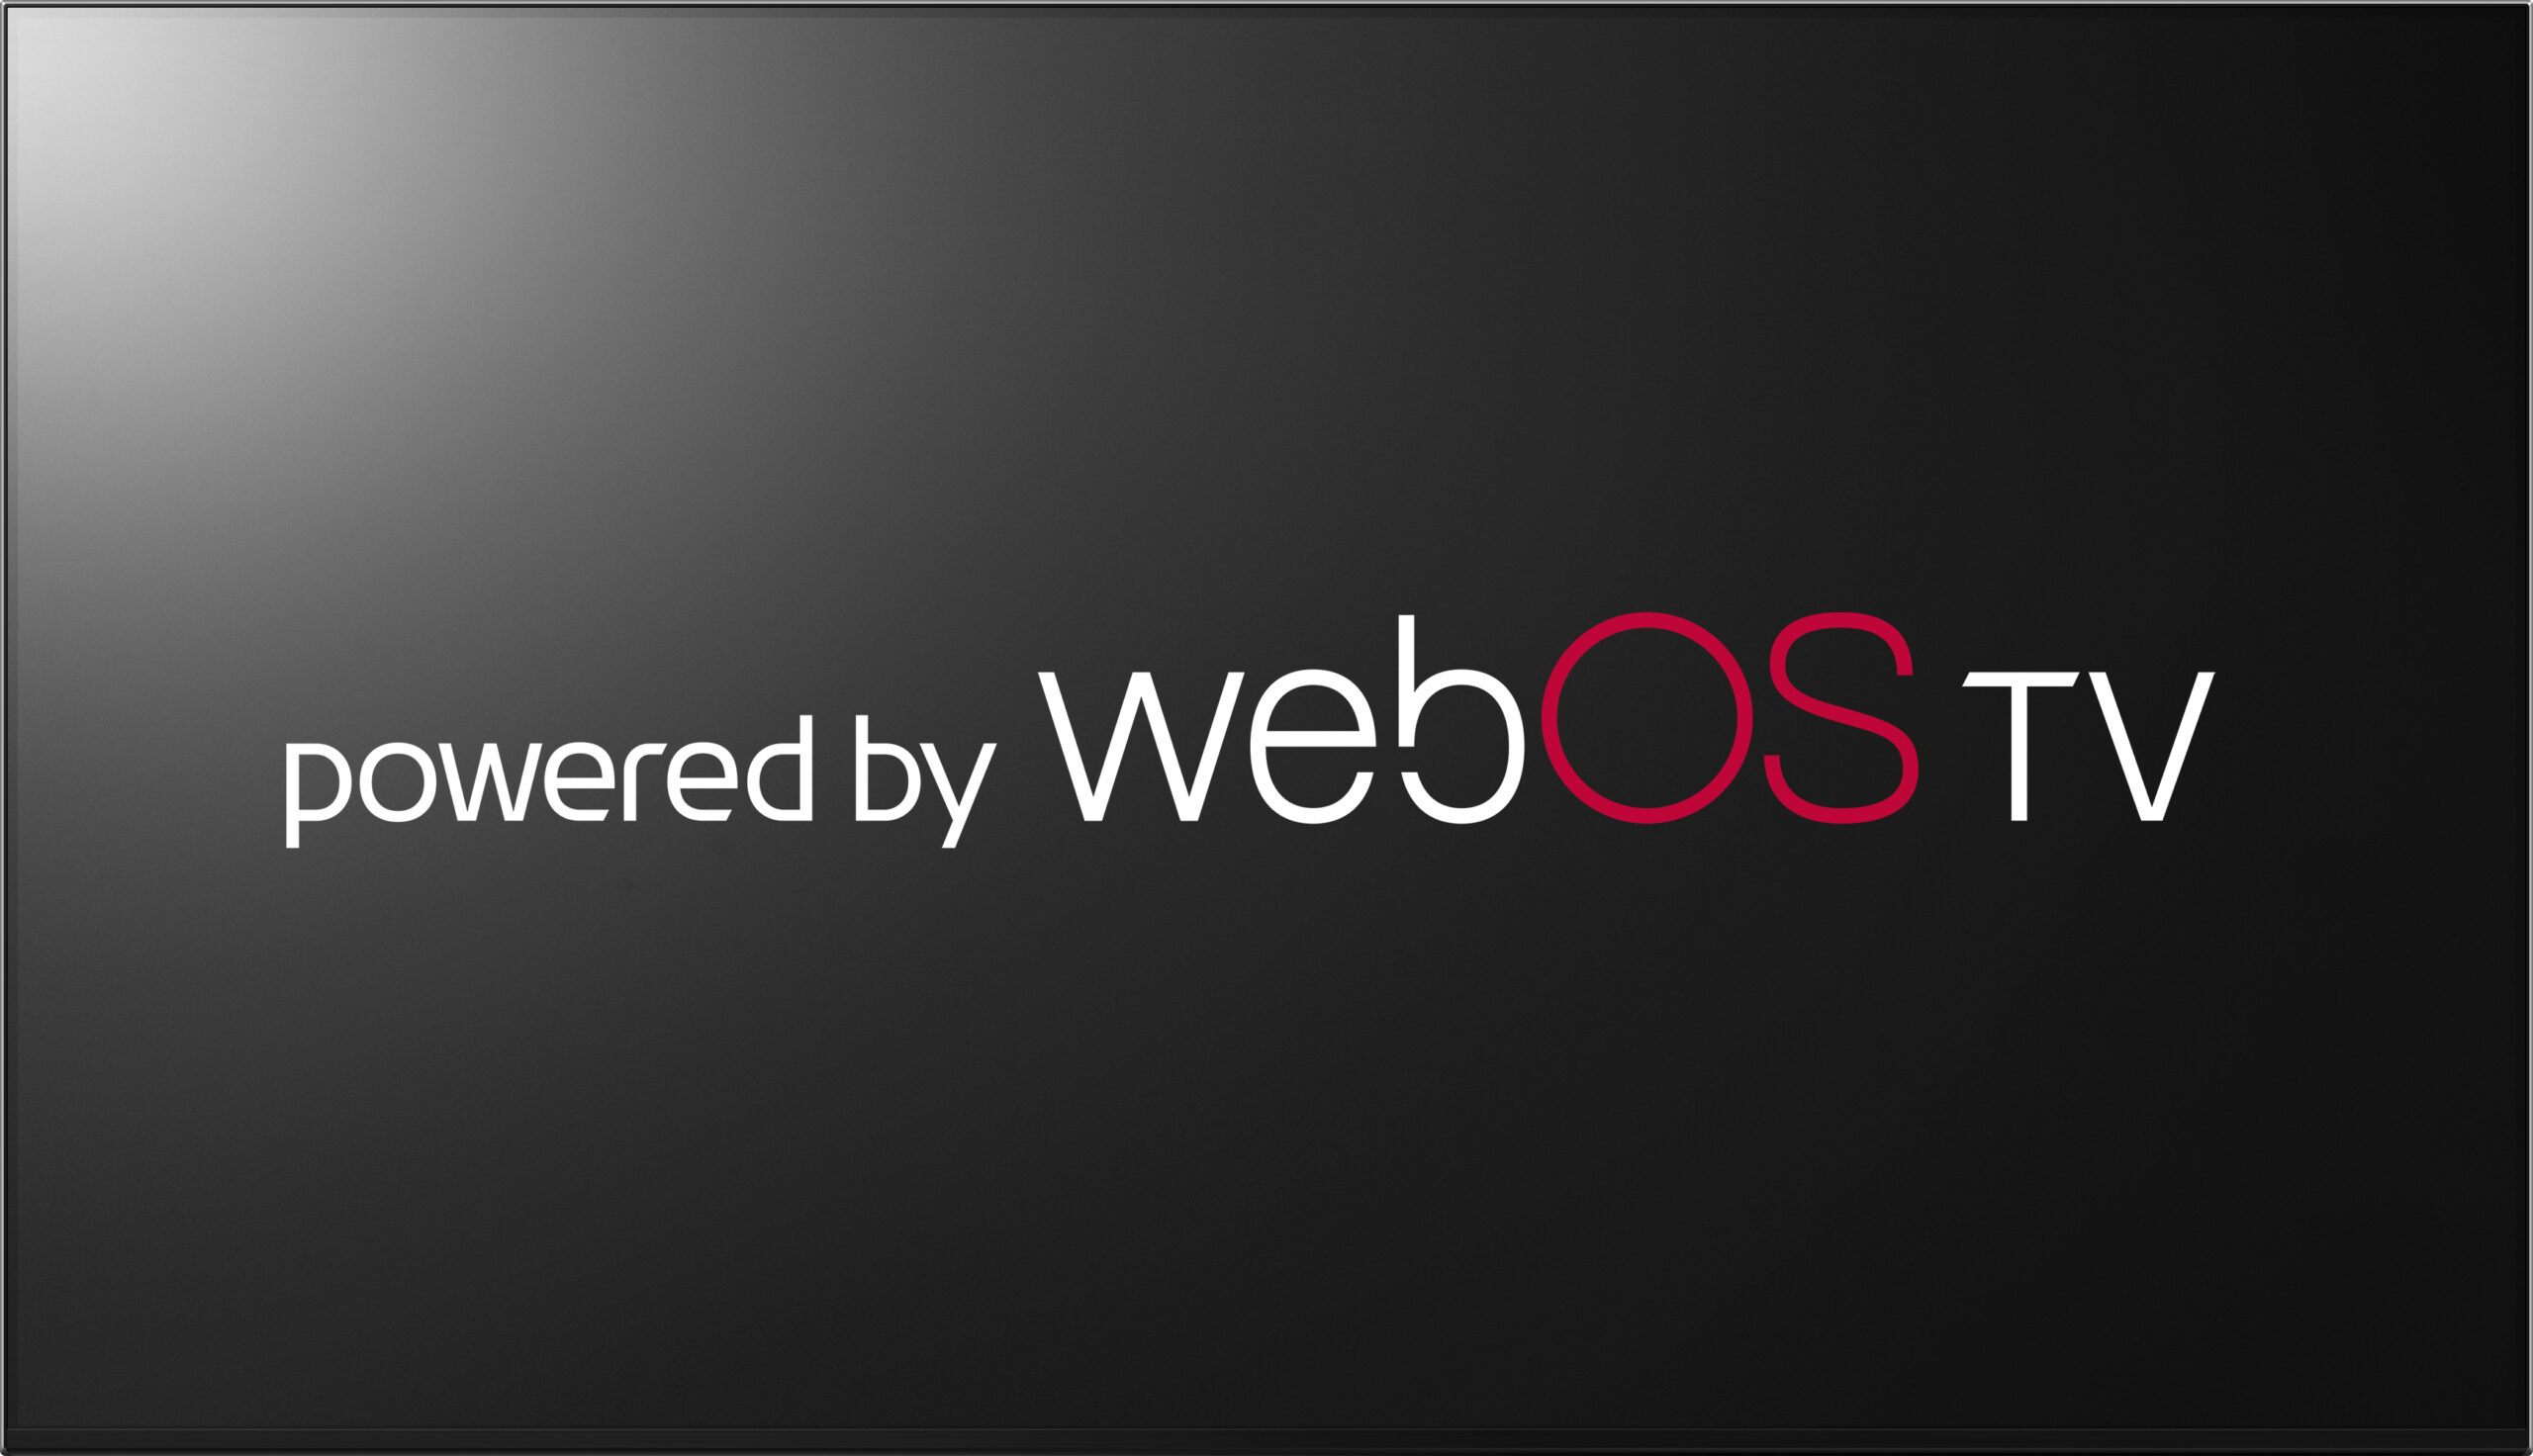 A logo for LG's "Powered by webOS TV" program